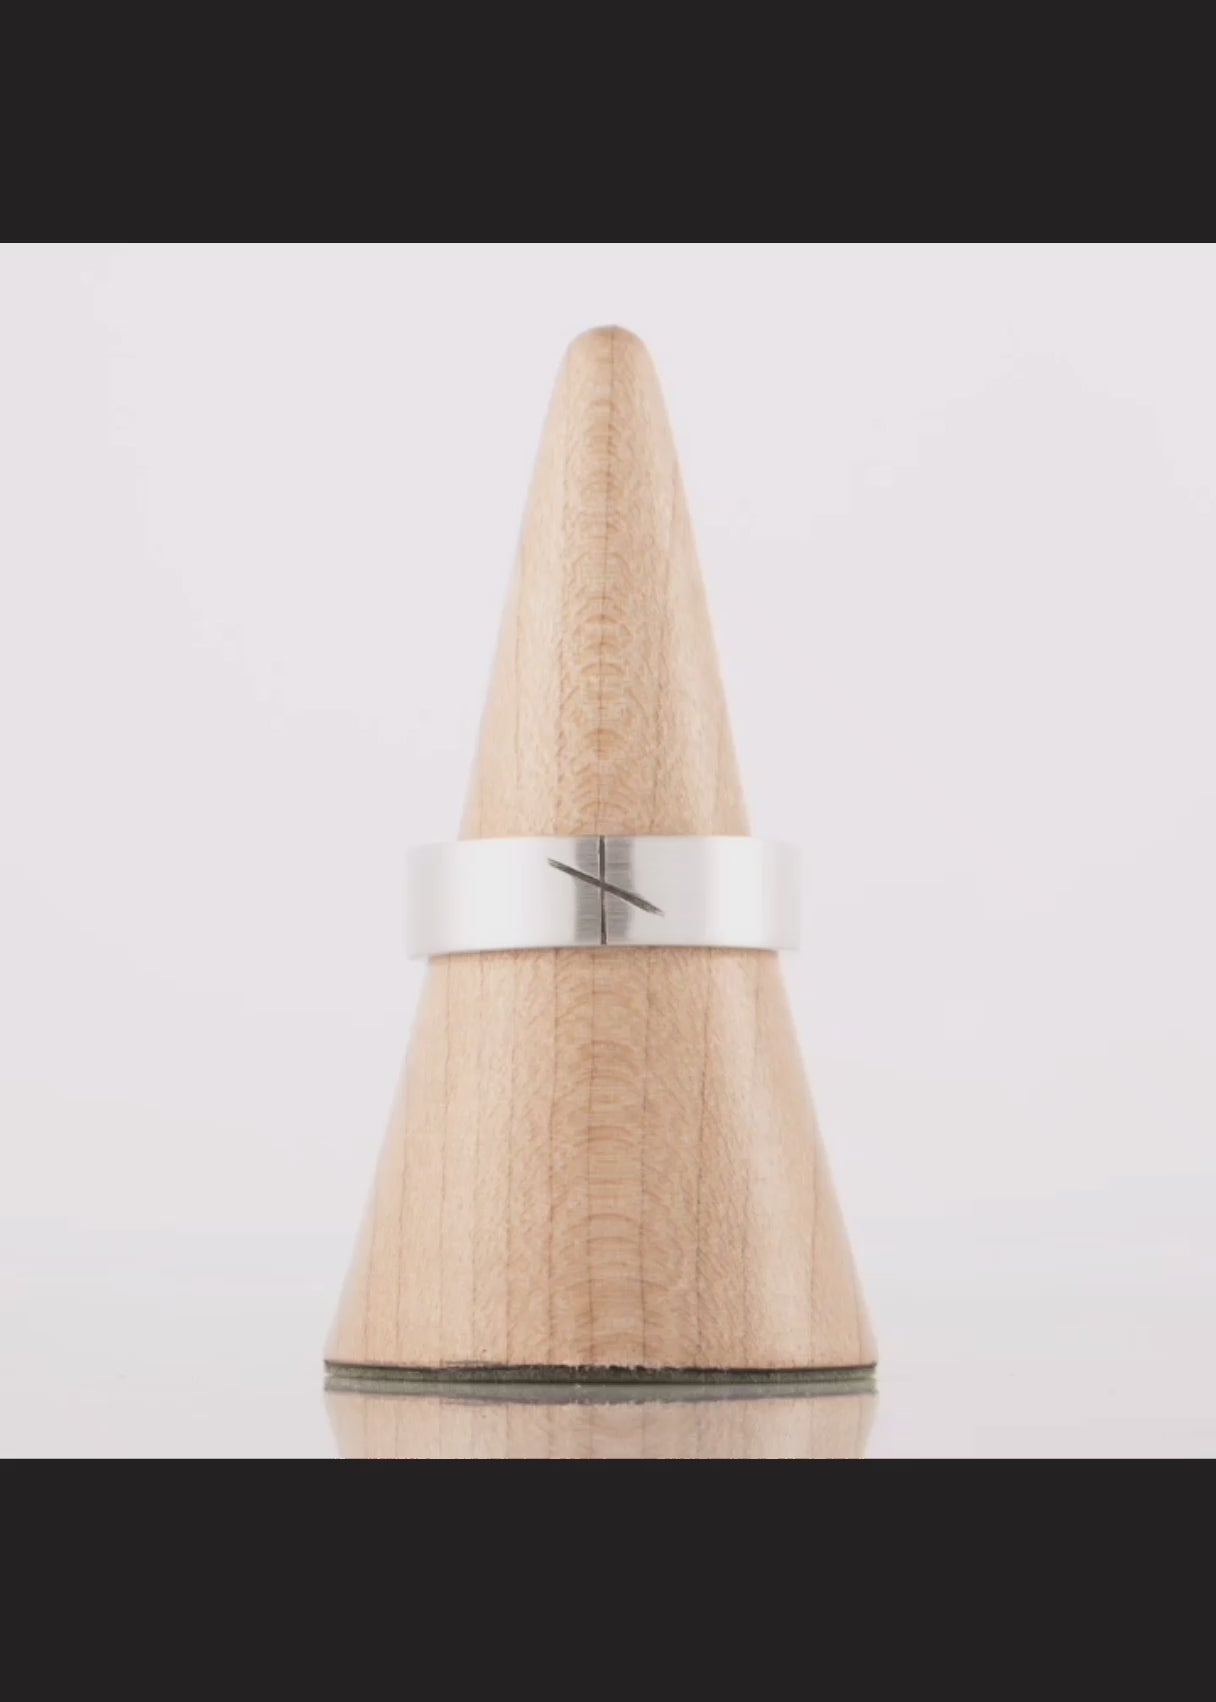 360 degree view video of the Ogham ring for men